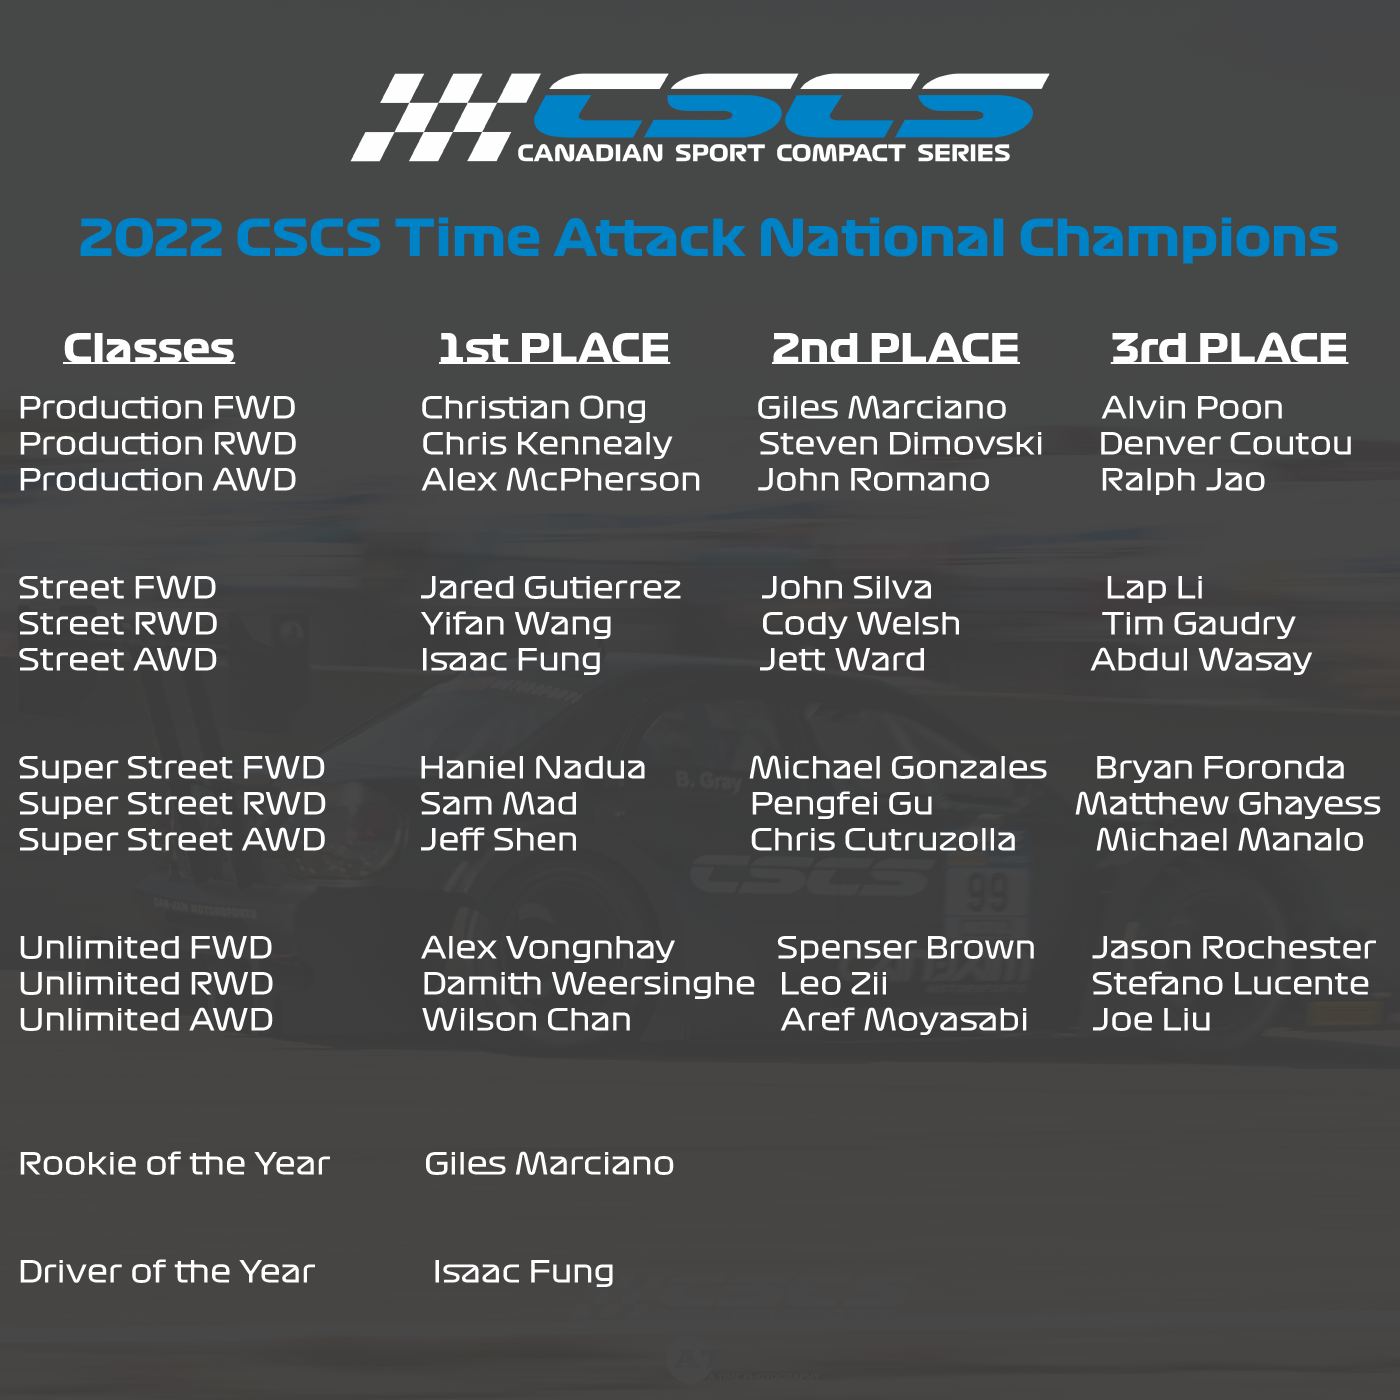 2022 CSCS Time Attack National Champions